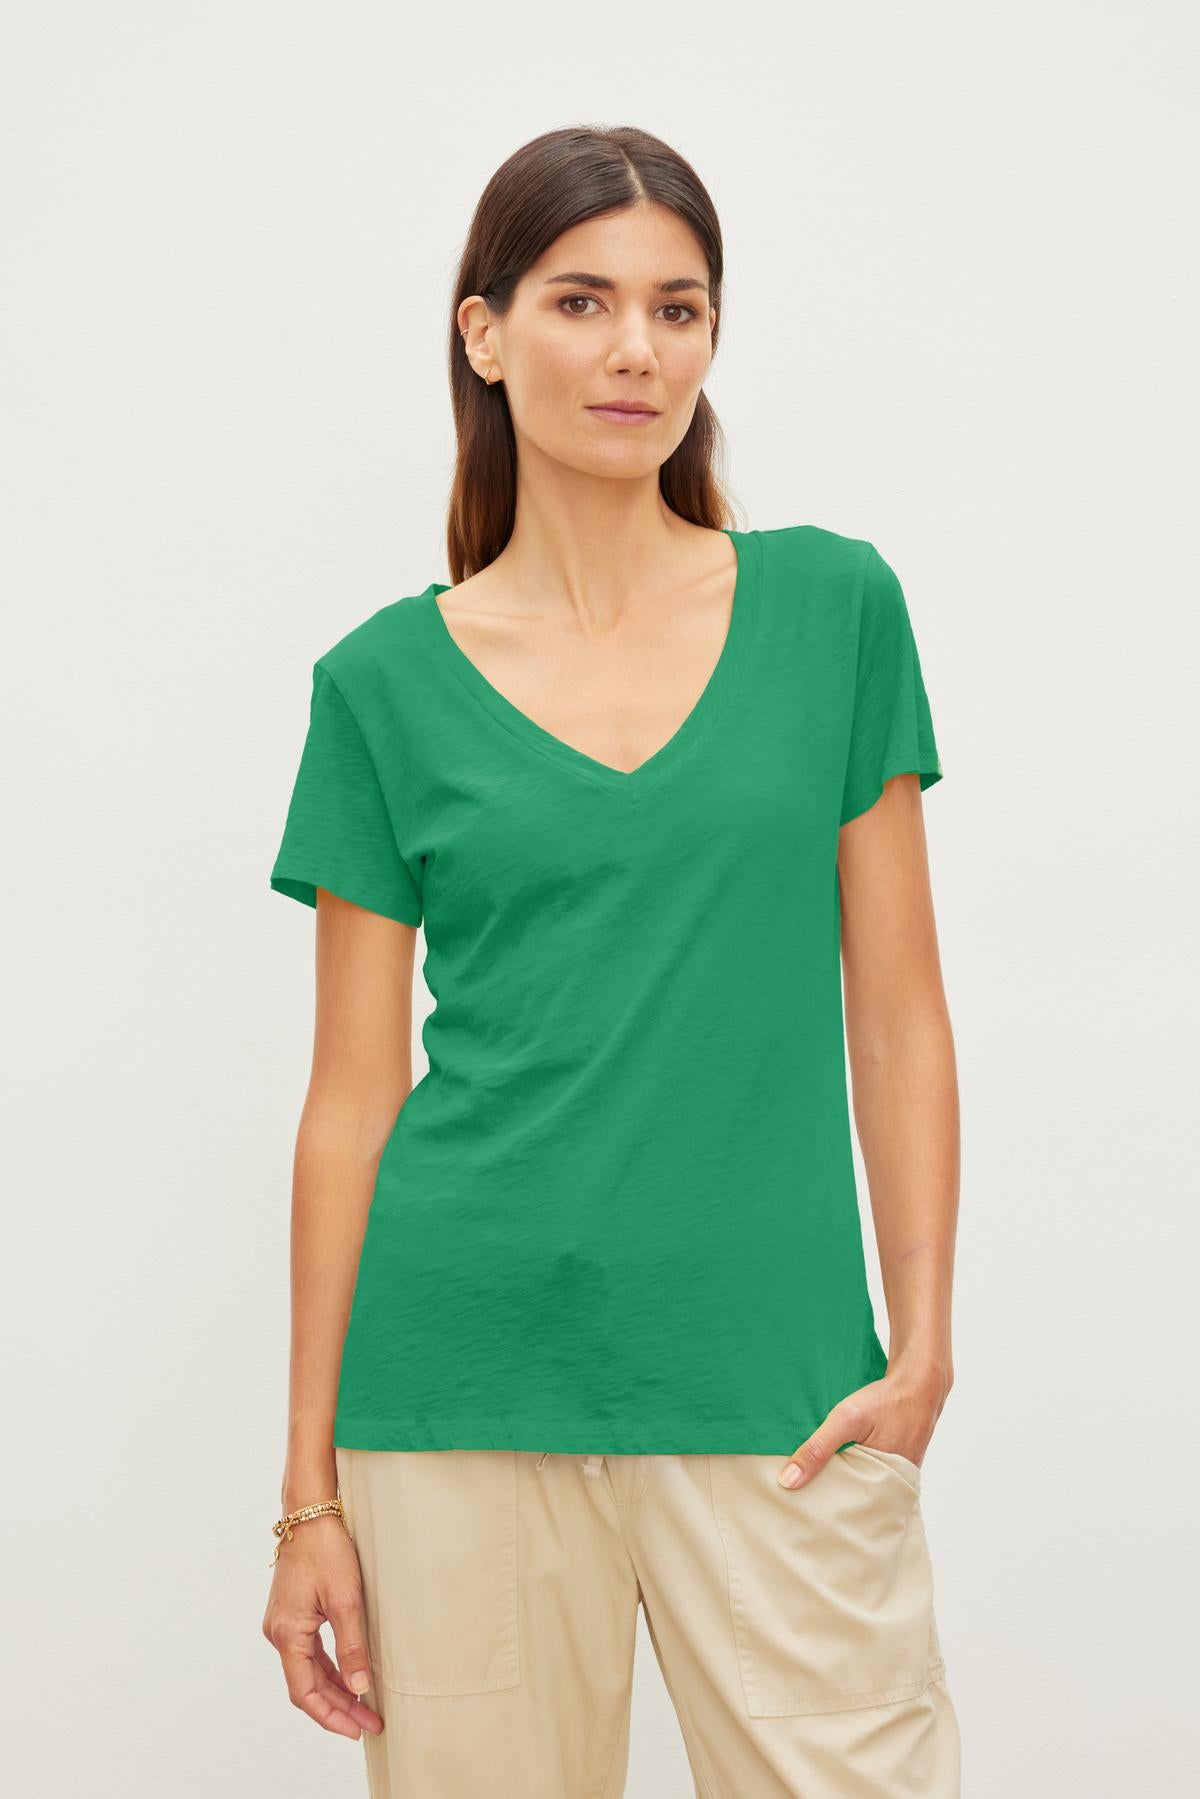 A woman in a Velvet by Graham & Spencer LILITH COTTON SLUB V-NECK TEE and beige pants, standing against a plain white background, looking at the camera.-36910215037121